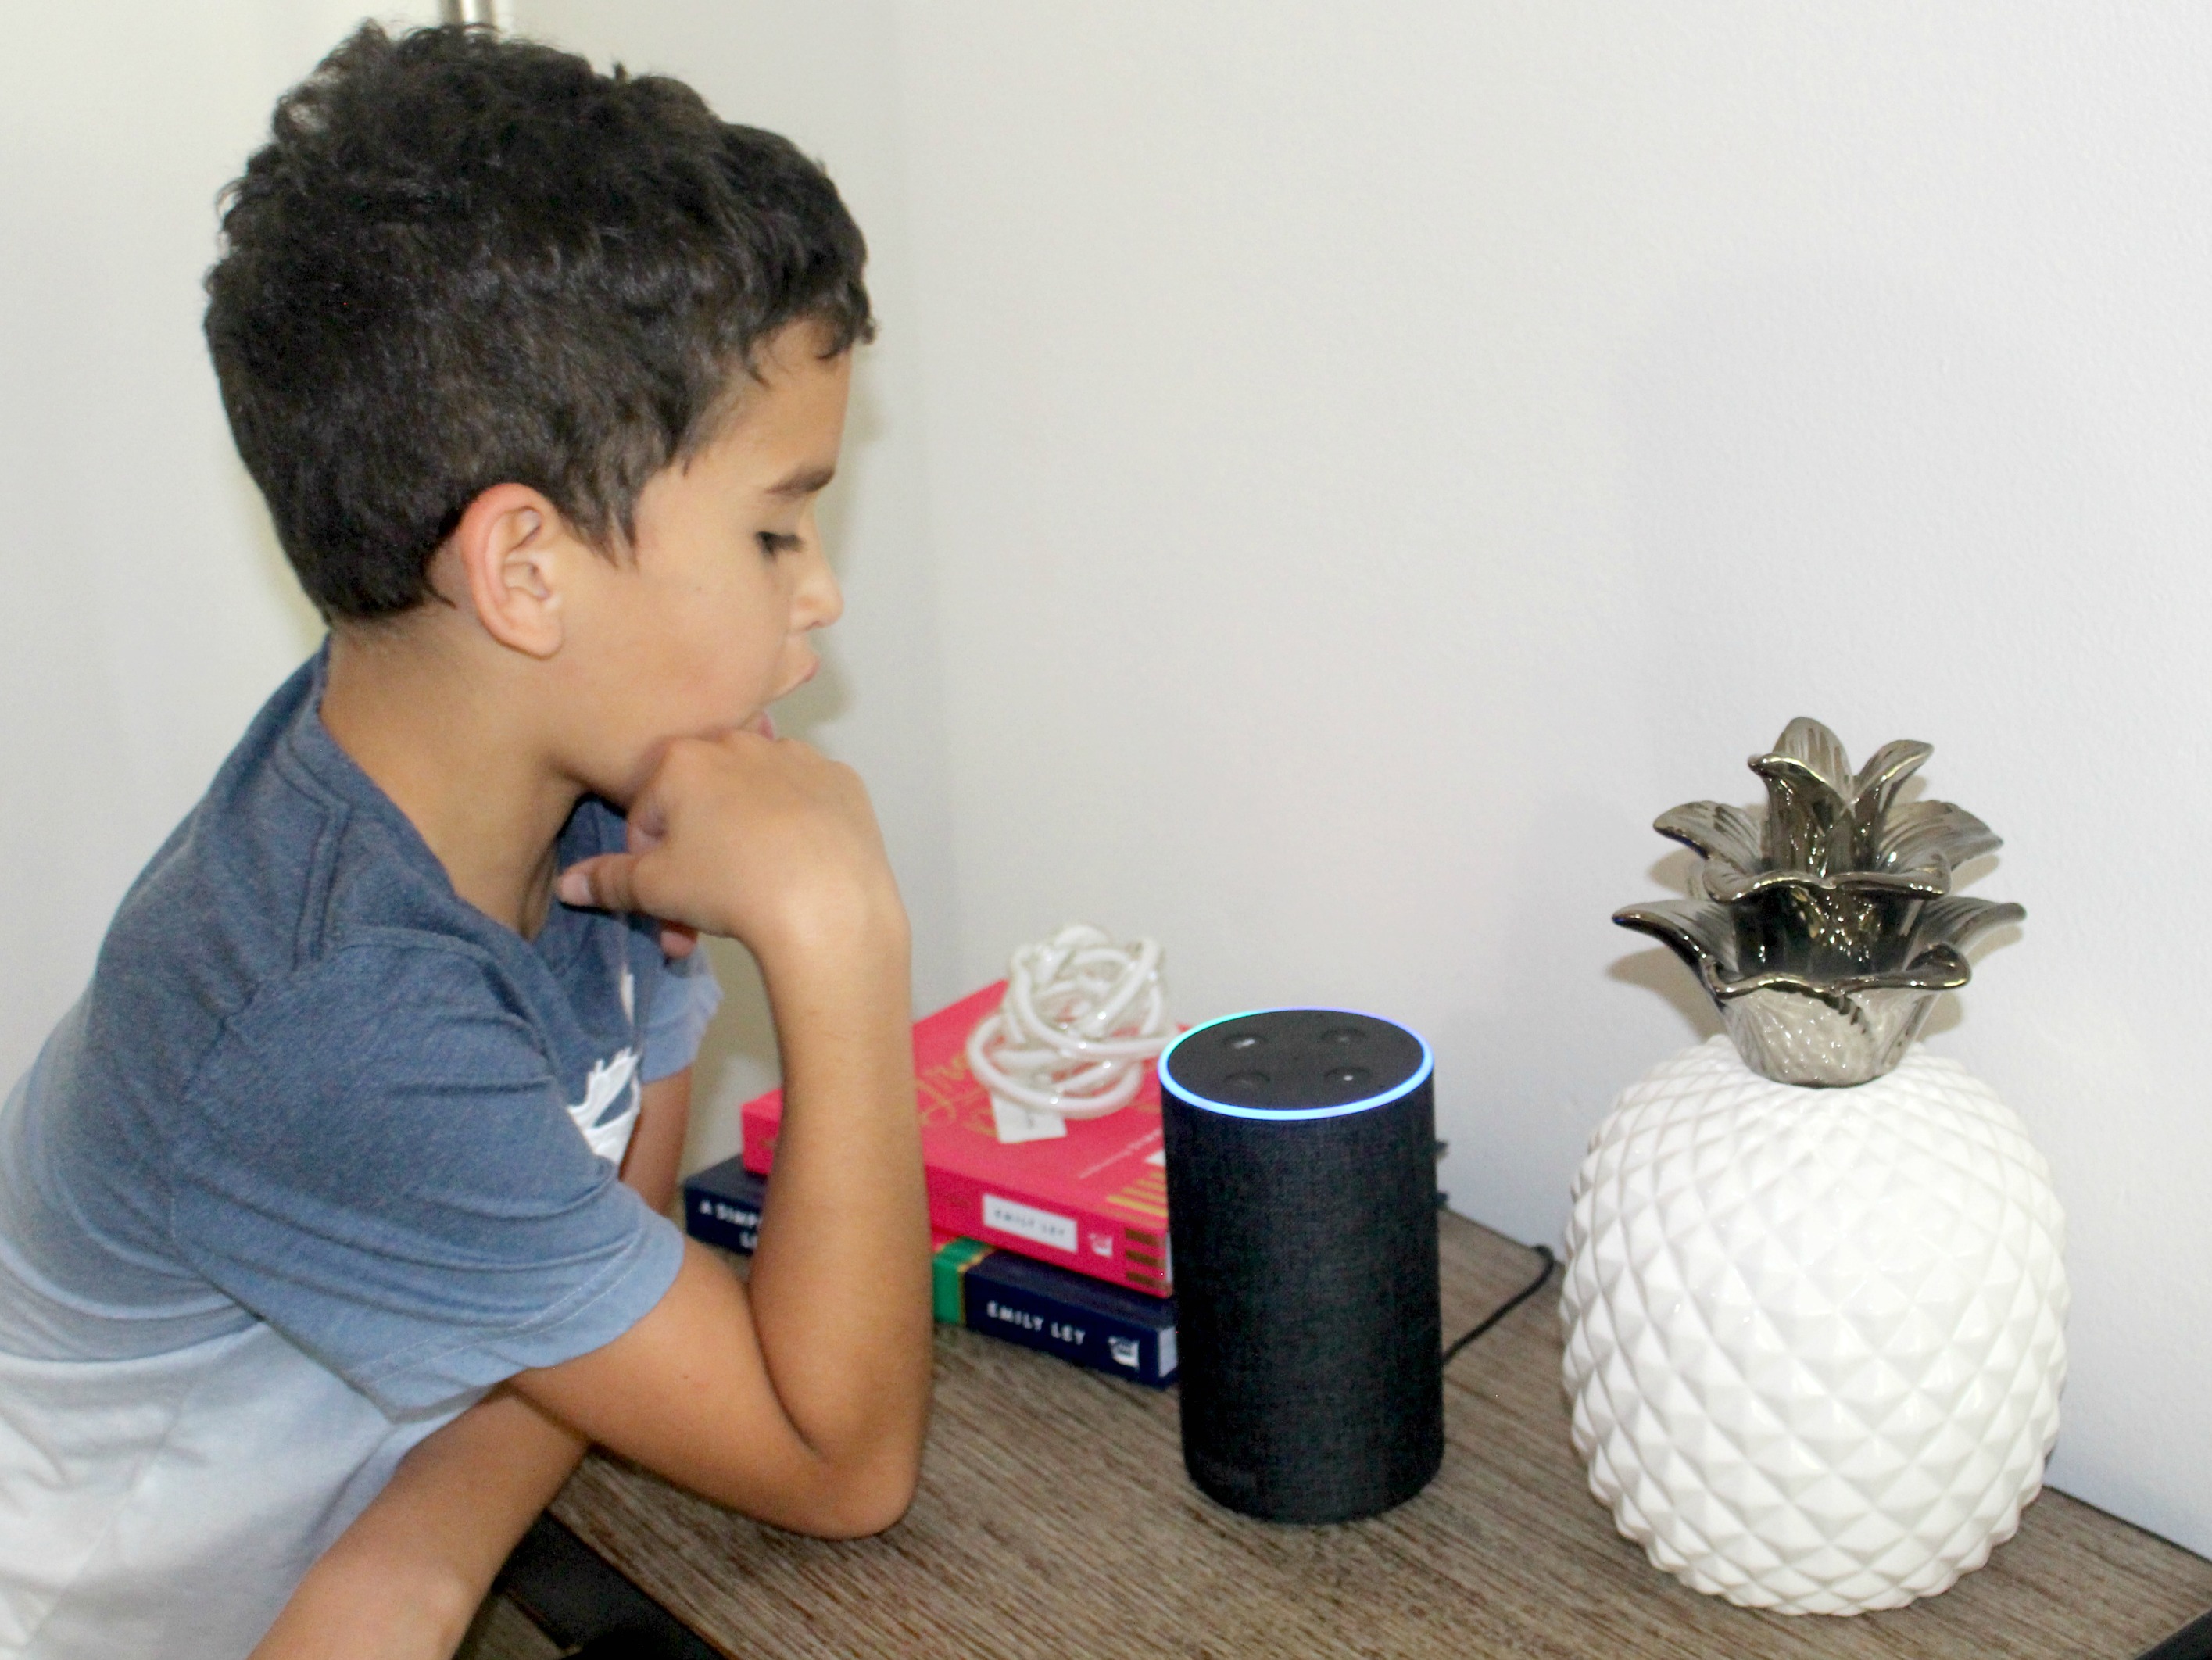 How Alexa Skill Blueprints is Keeping Our Family Connected!